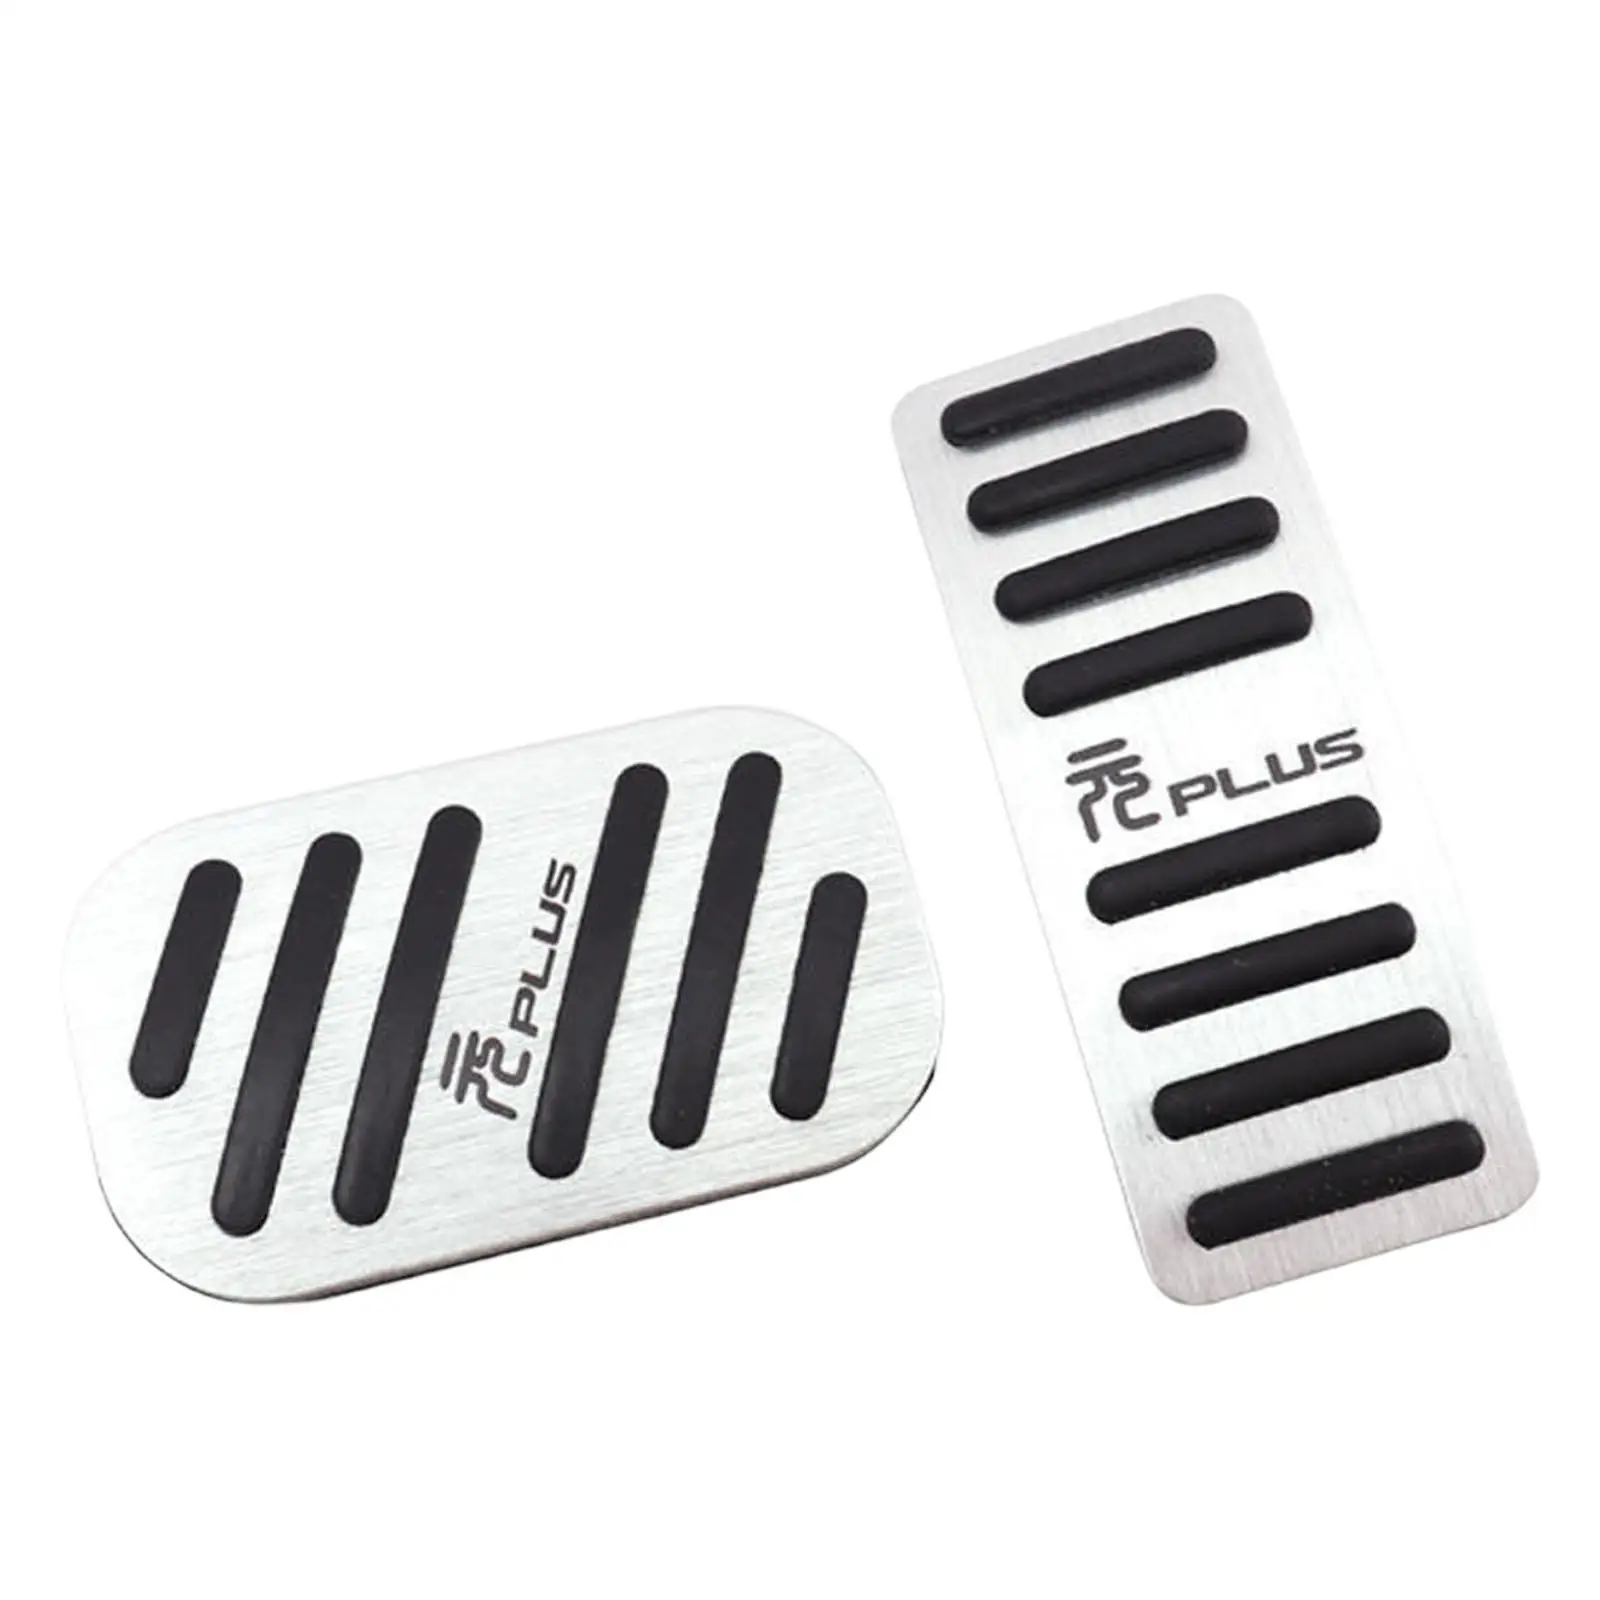 Brake Pedal Cover Gas Pedal Cover Kit Foot Pedals Pads for Byd Atto 3 Yuan Plus Spare Parts Accessories Replacement Durable